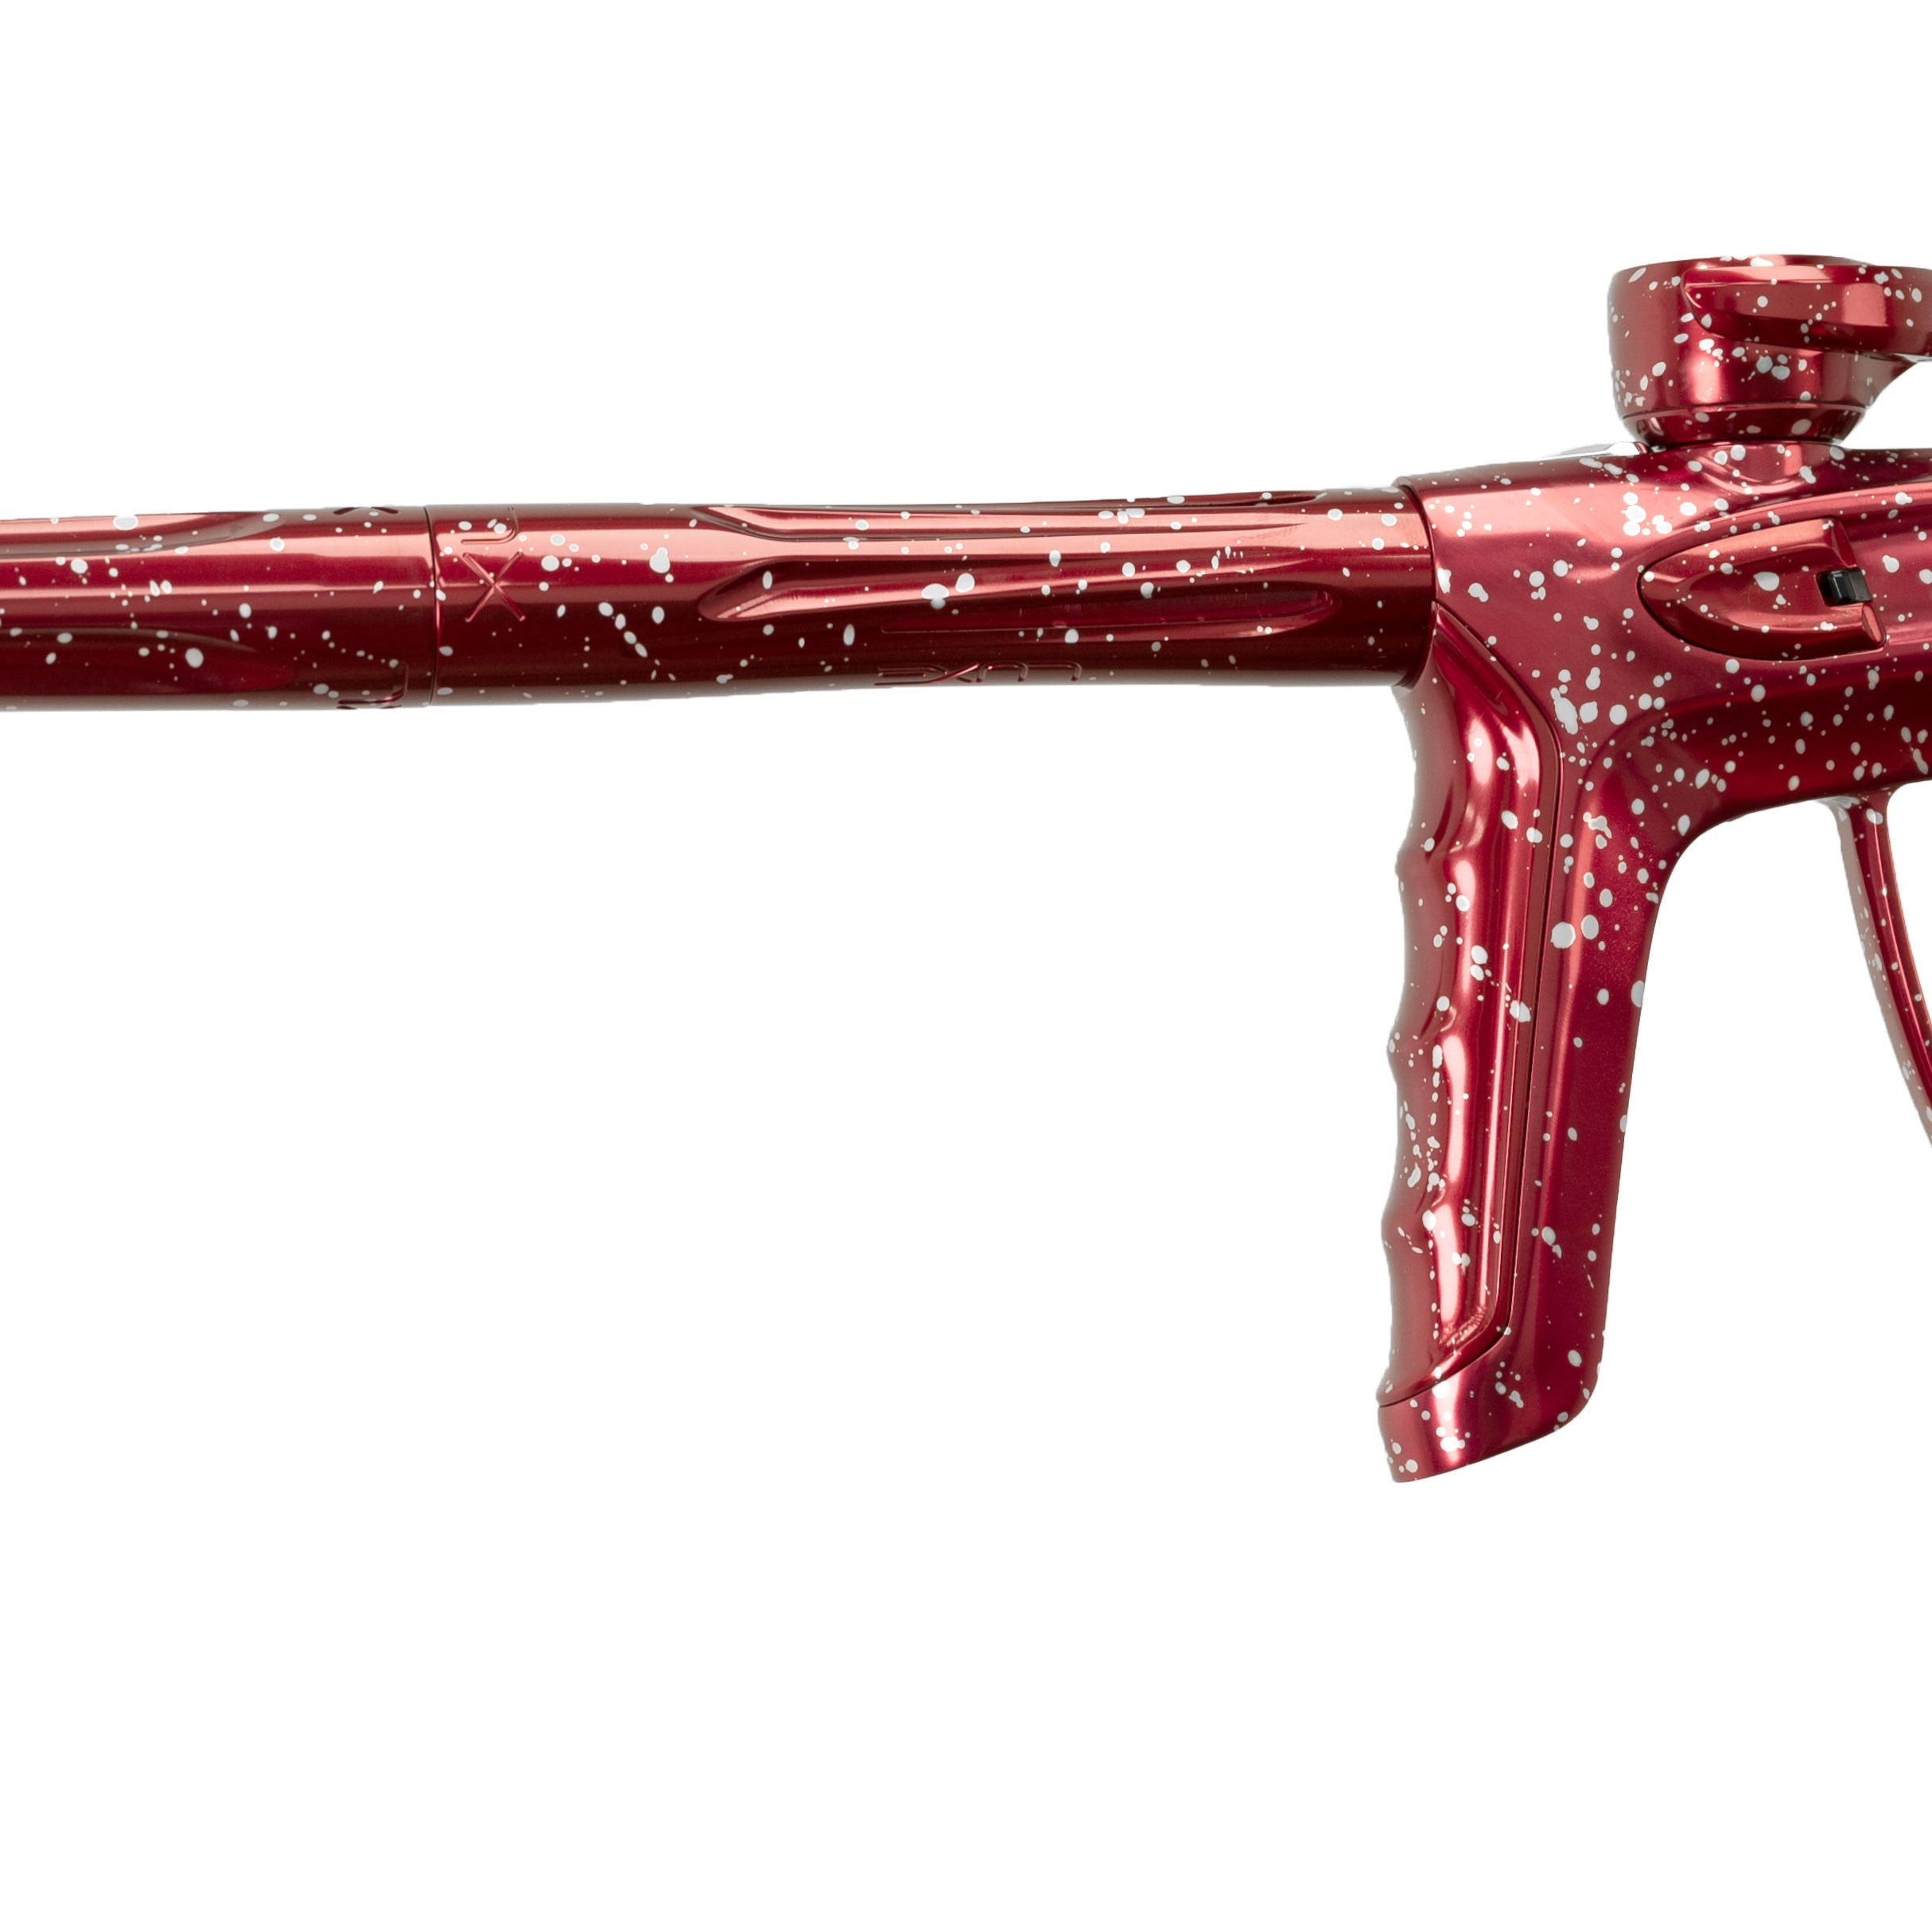 DLX Luxe TM40 Paintball Gun - LE Dr. Speckle (Gloss Red / Silver Speckle)